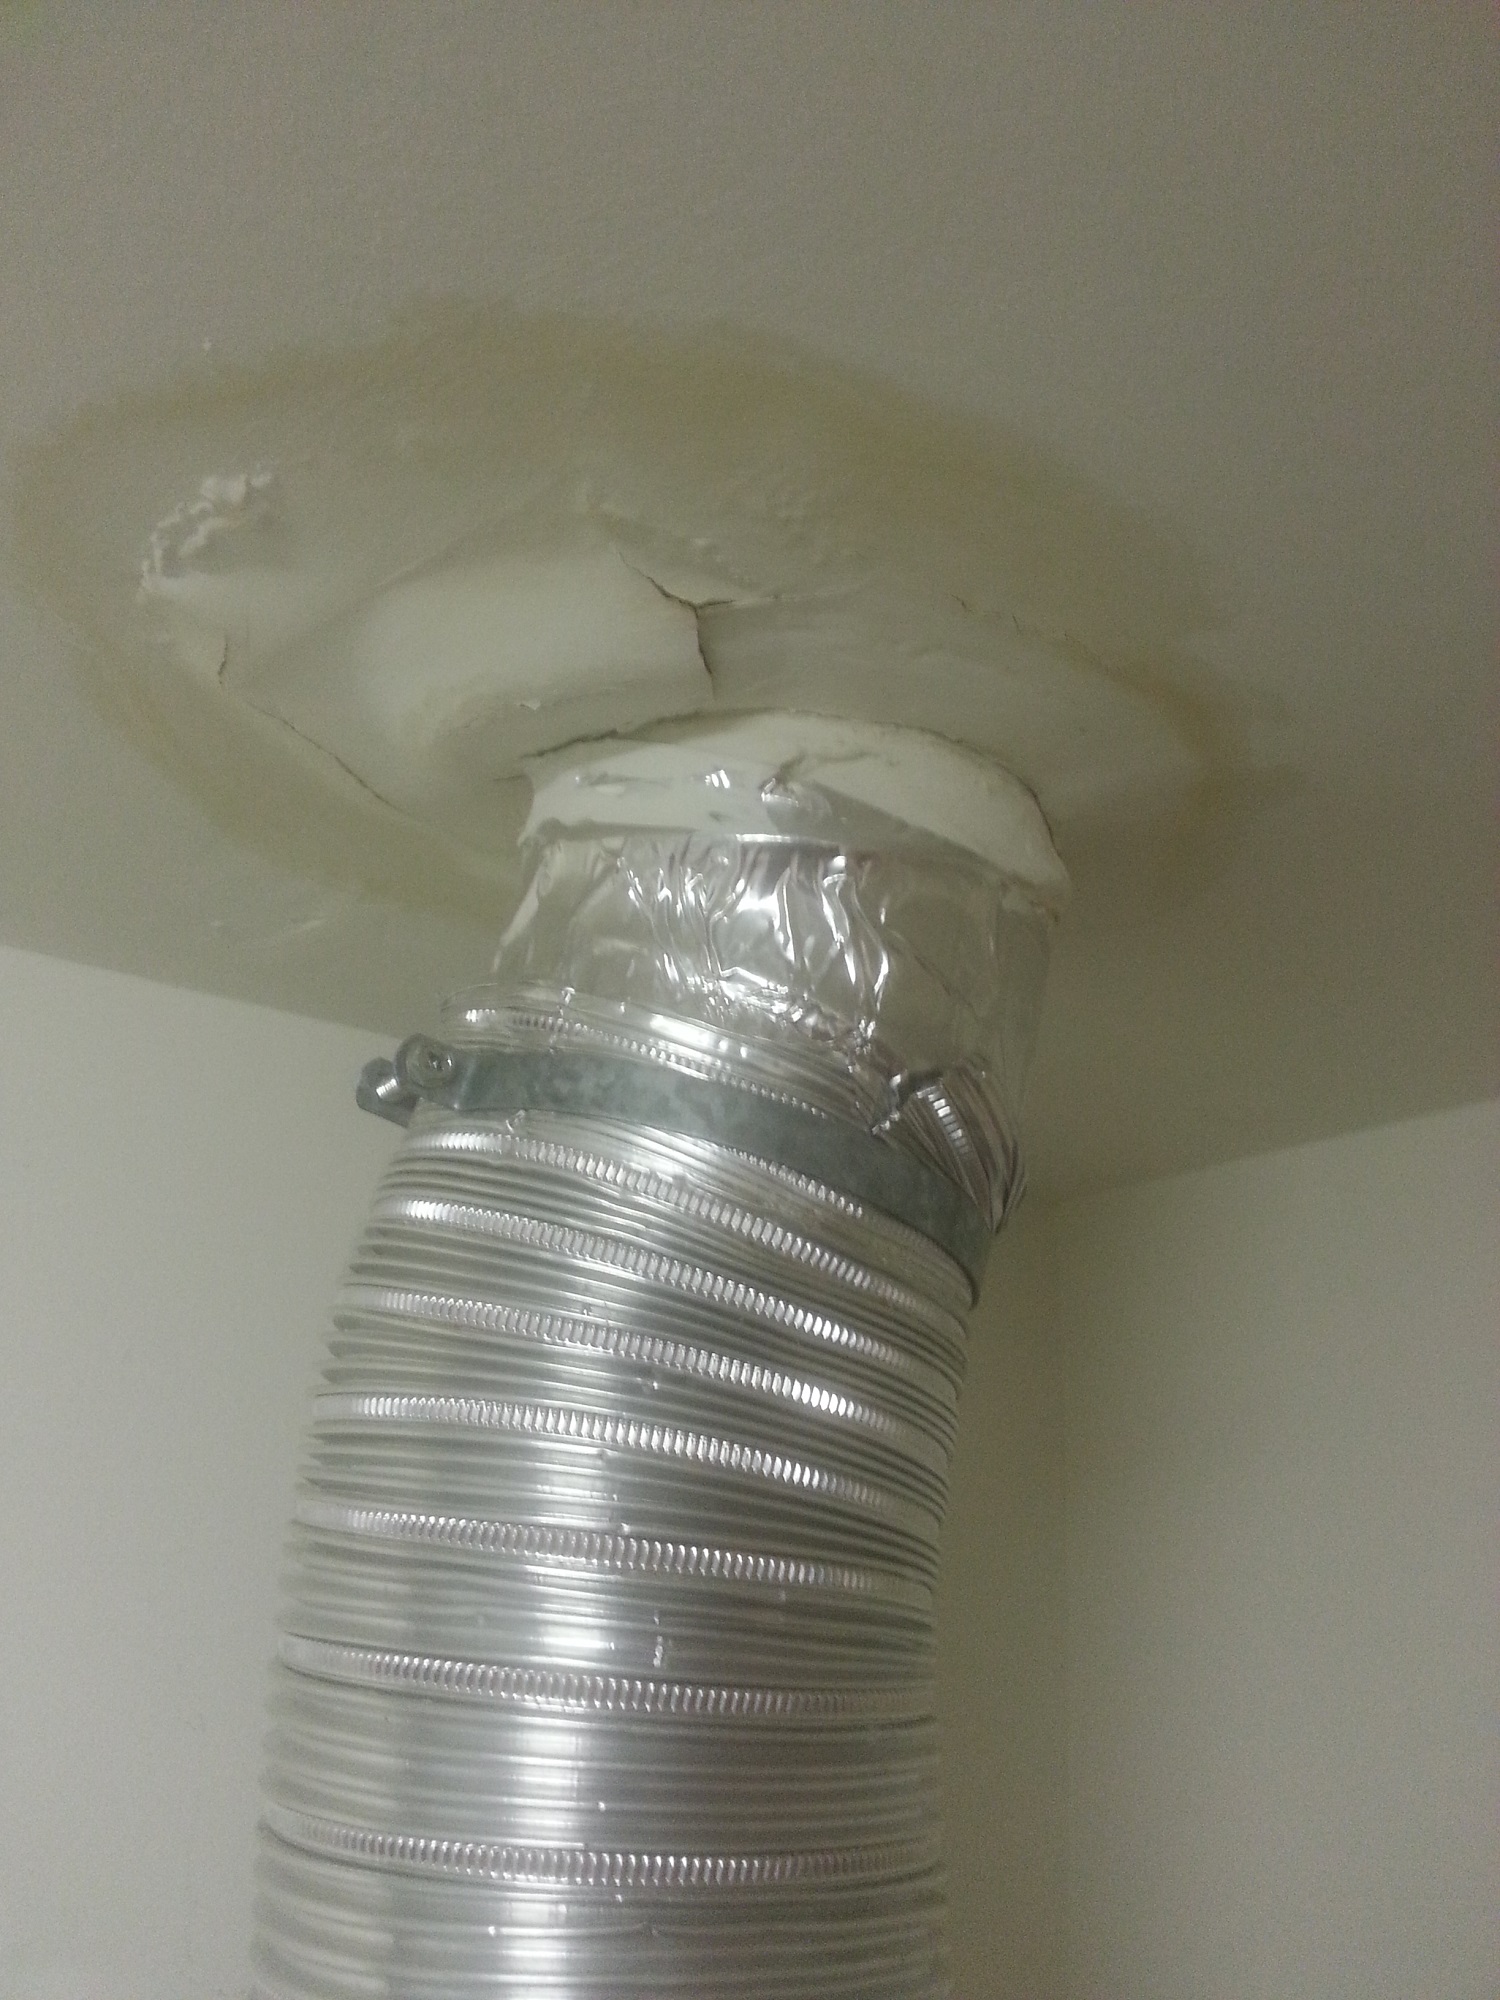 Leaky Roof Around Dryer Vent Floor Roof Shingles Washer